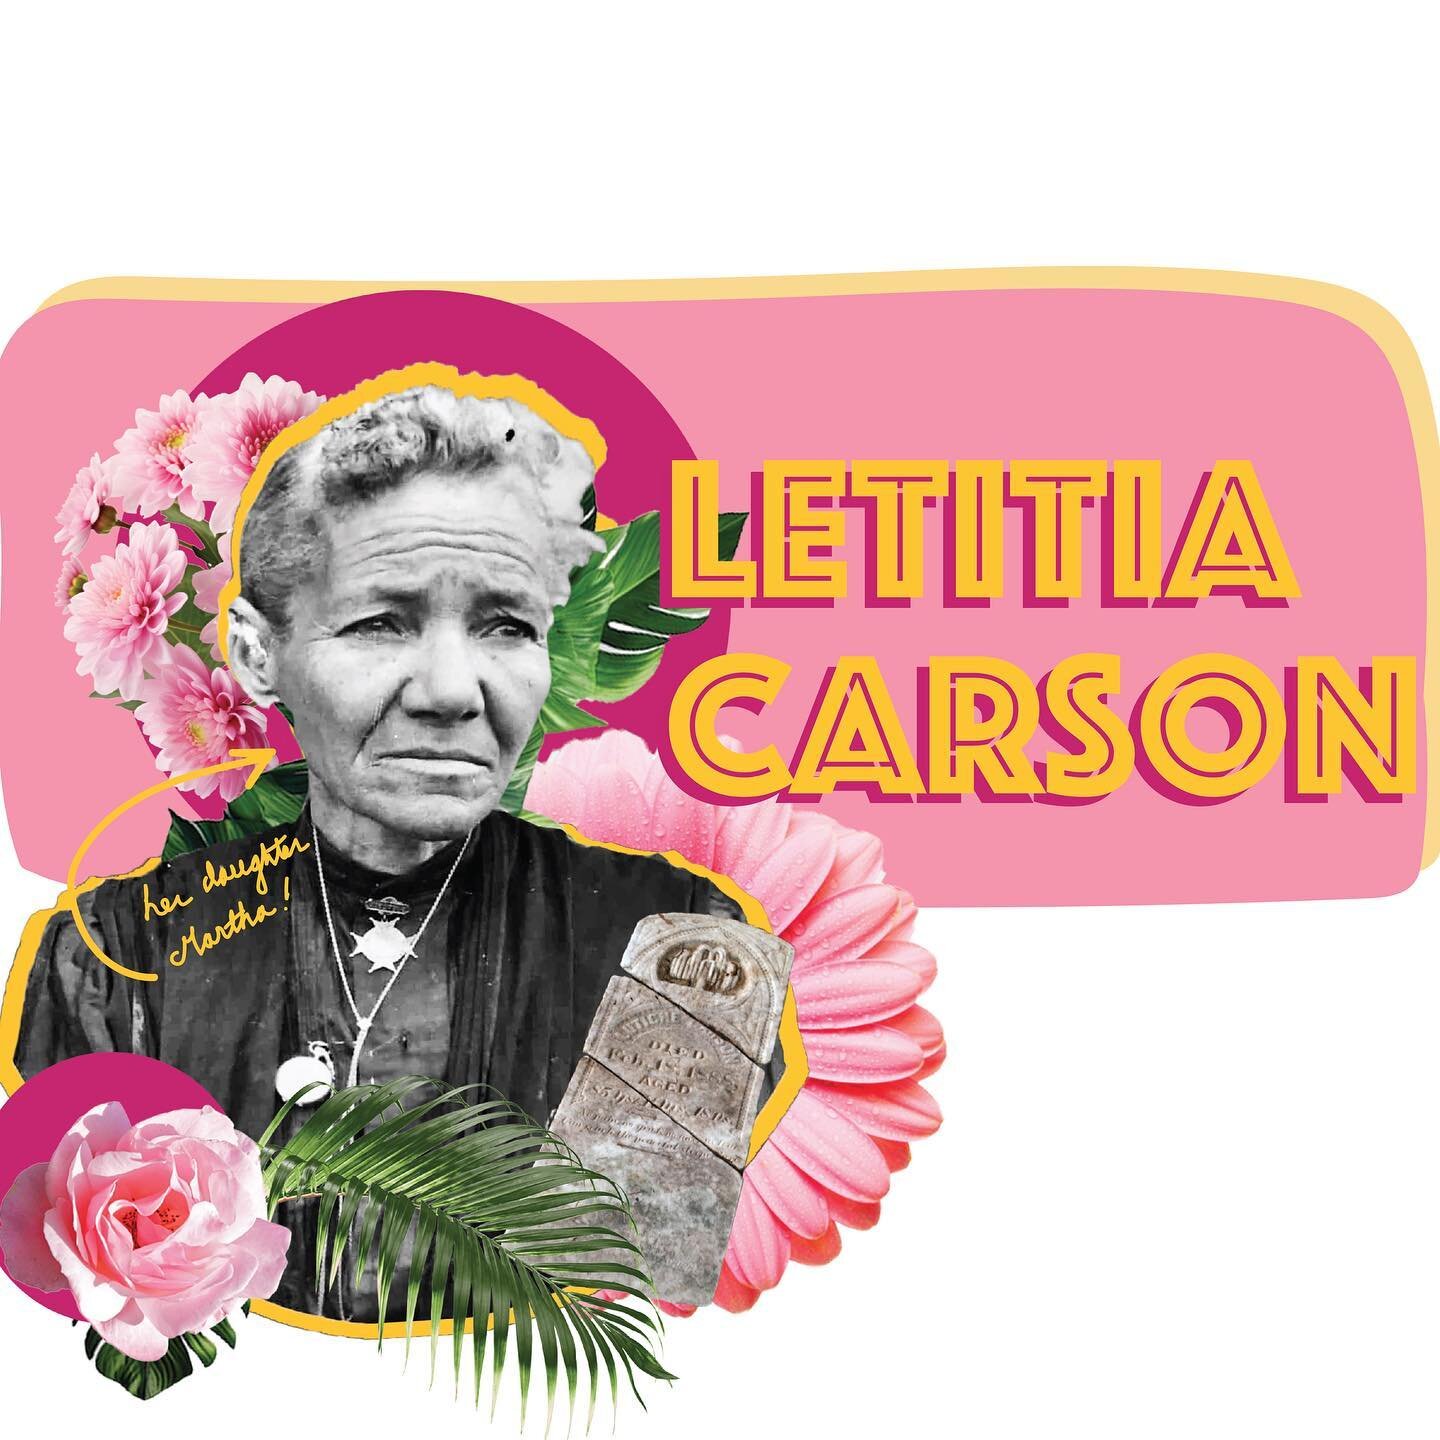 The first Black Woman in our series is Letitia Carson! Swipe to learn more about her victorious story here in the Pacific North West at a time where Black people were definitely not wanted in the region. Thanks for joining us for our Women&rsquo;s Hi